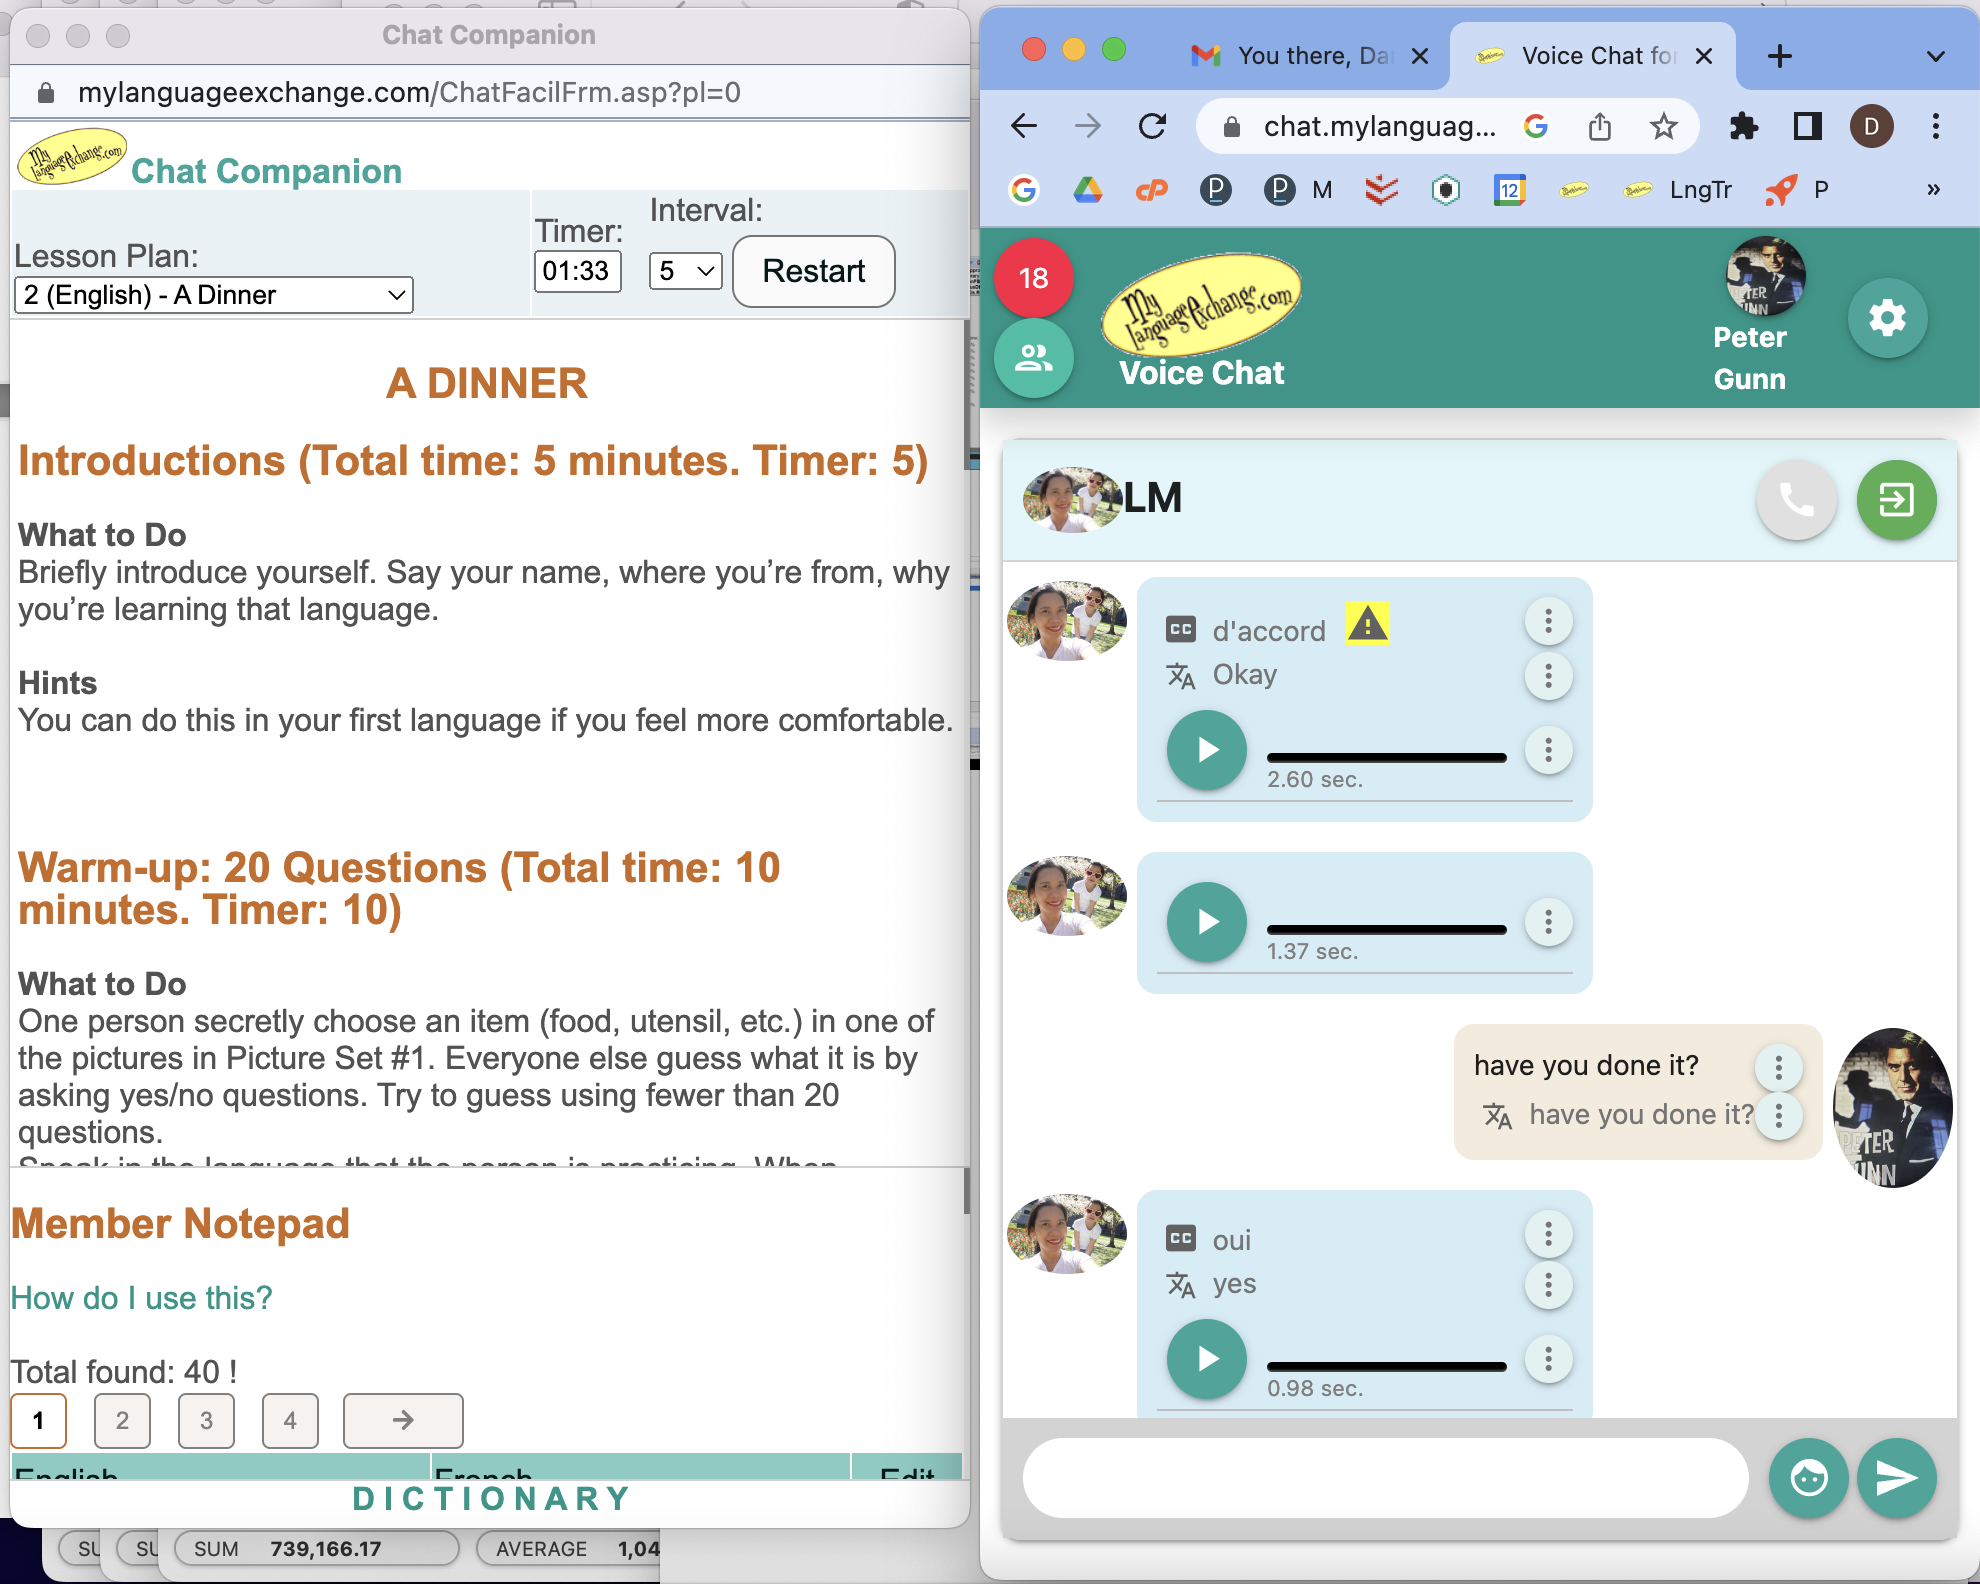 Chat Companion running along side language exchange voice chat for effective conversation practice